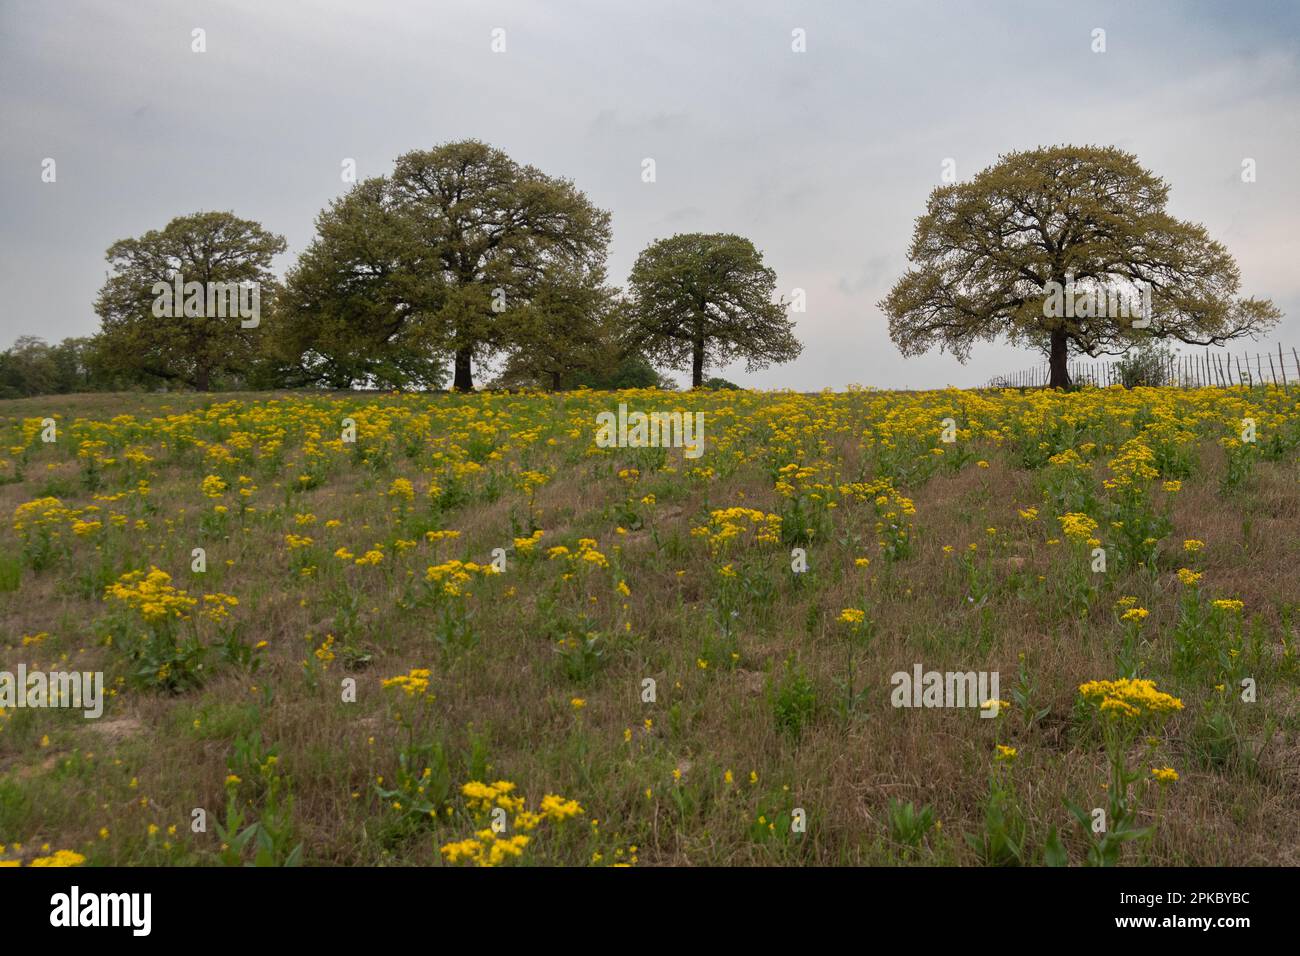 Trees lined up on top of a hill on the horizon beyond a meadow full of vibrant, yellow California Goldenrod flowers on a cloudy morning. Stock Photo